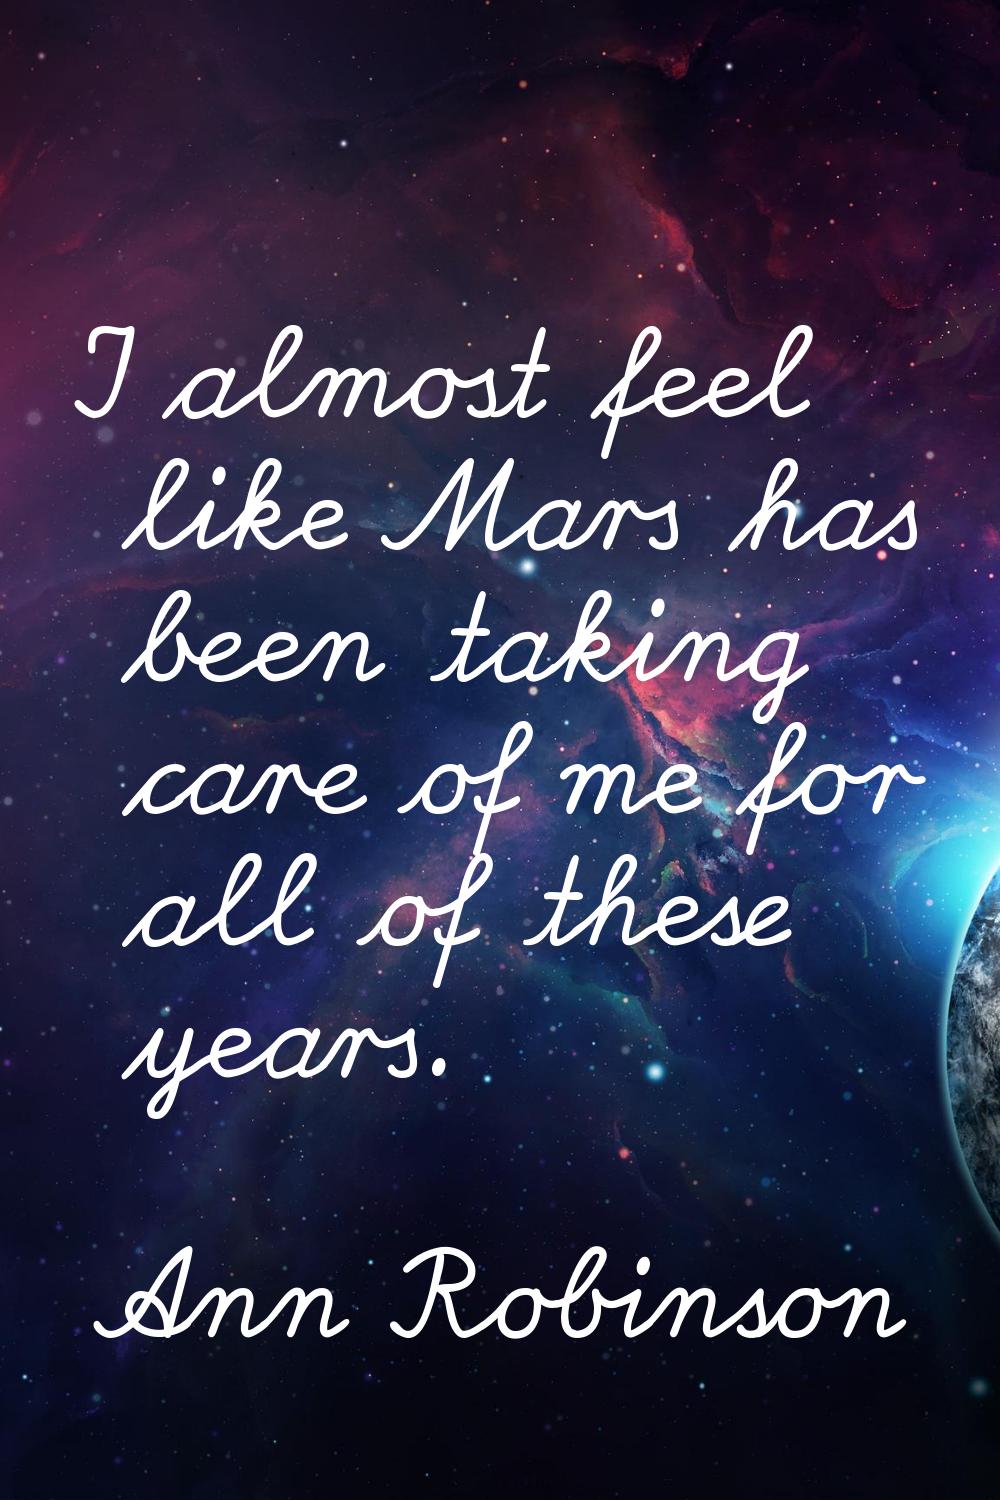 I almost feel like Mars has been taking care of me for all of these years.